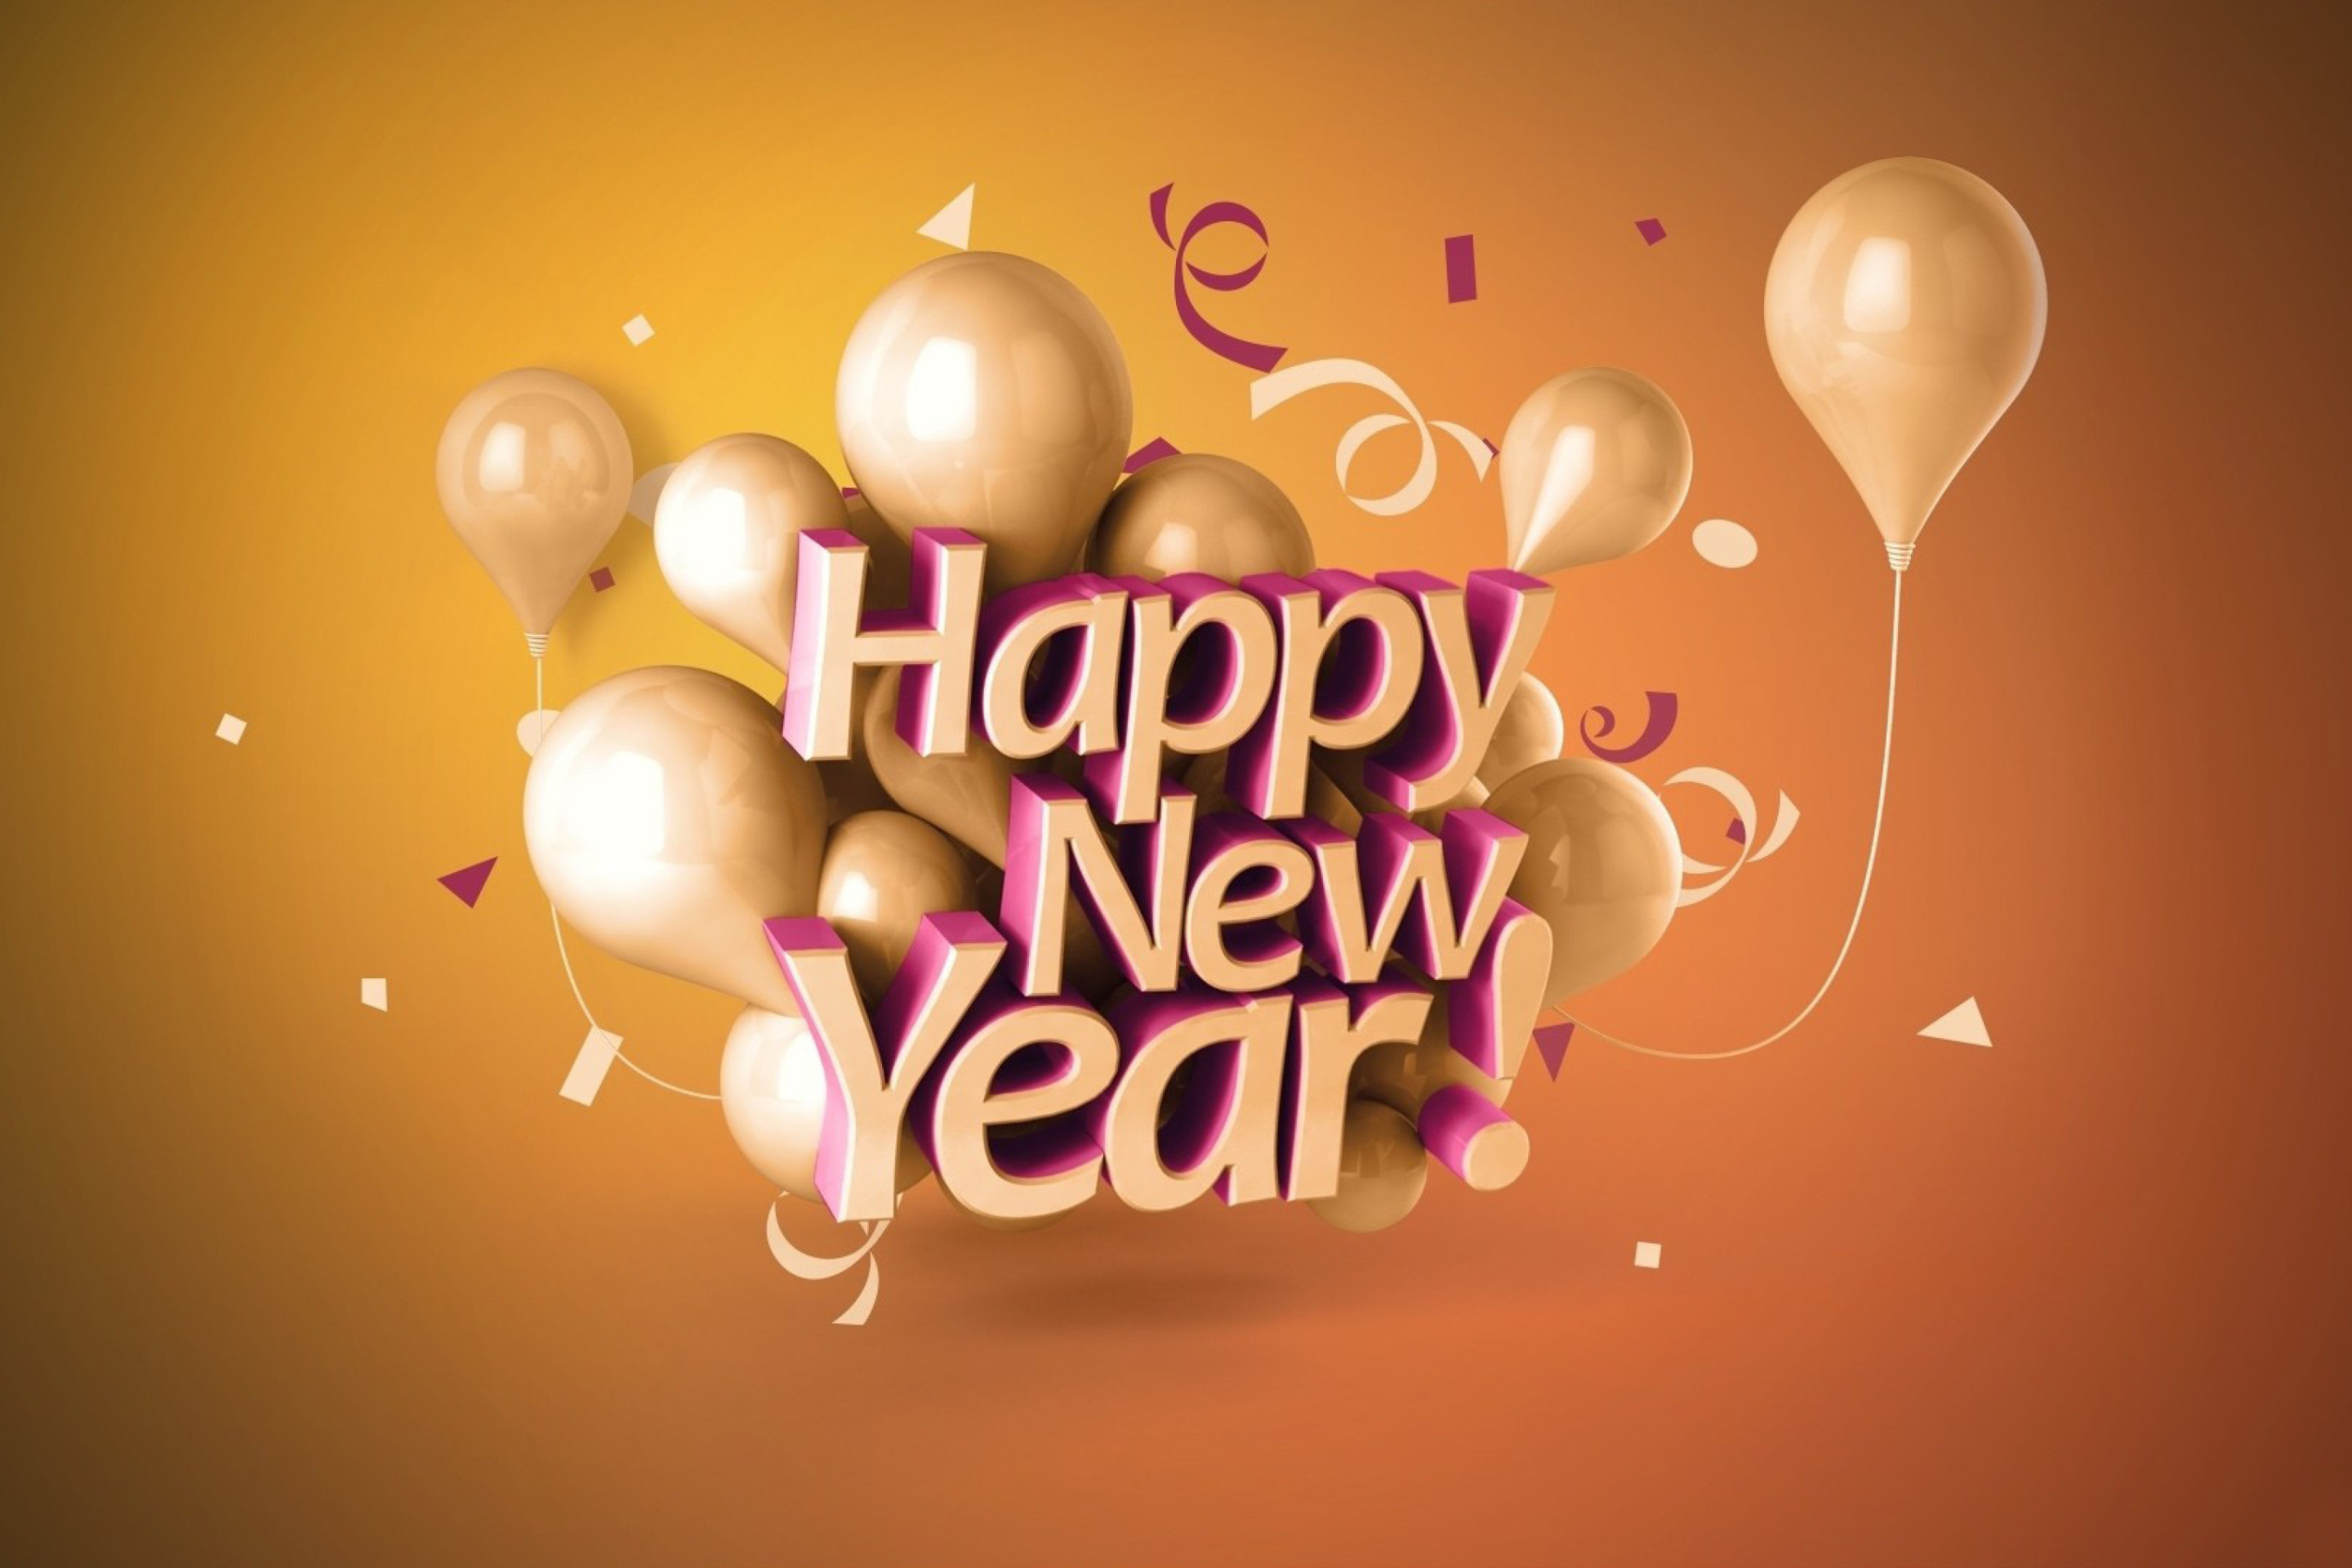 Happy New Year Good Luck Quote wallpaper 2880x1920